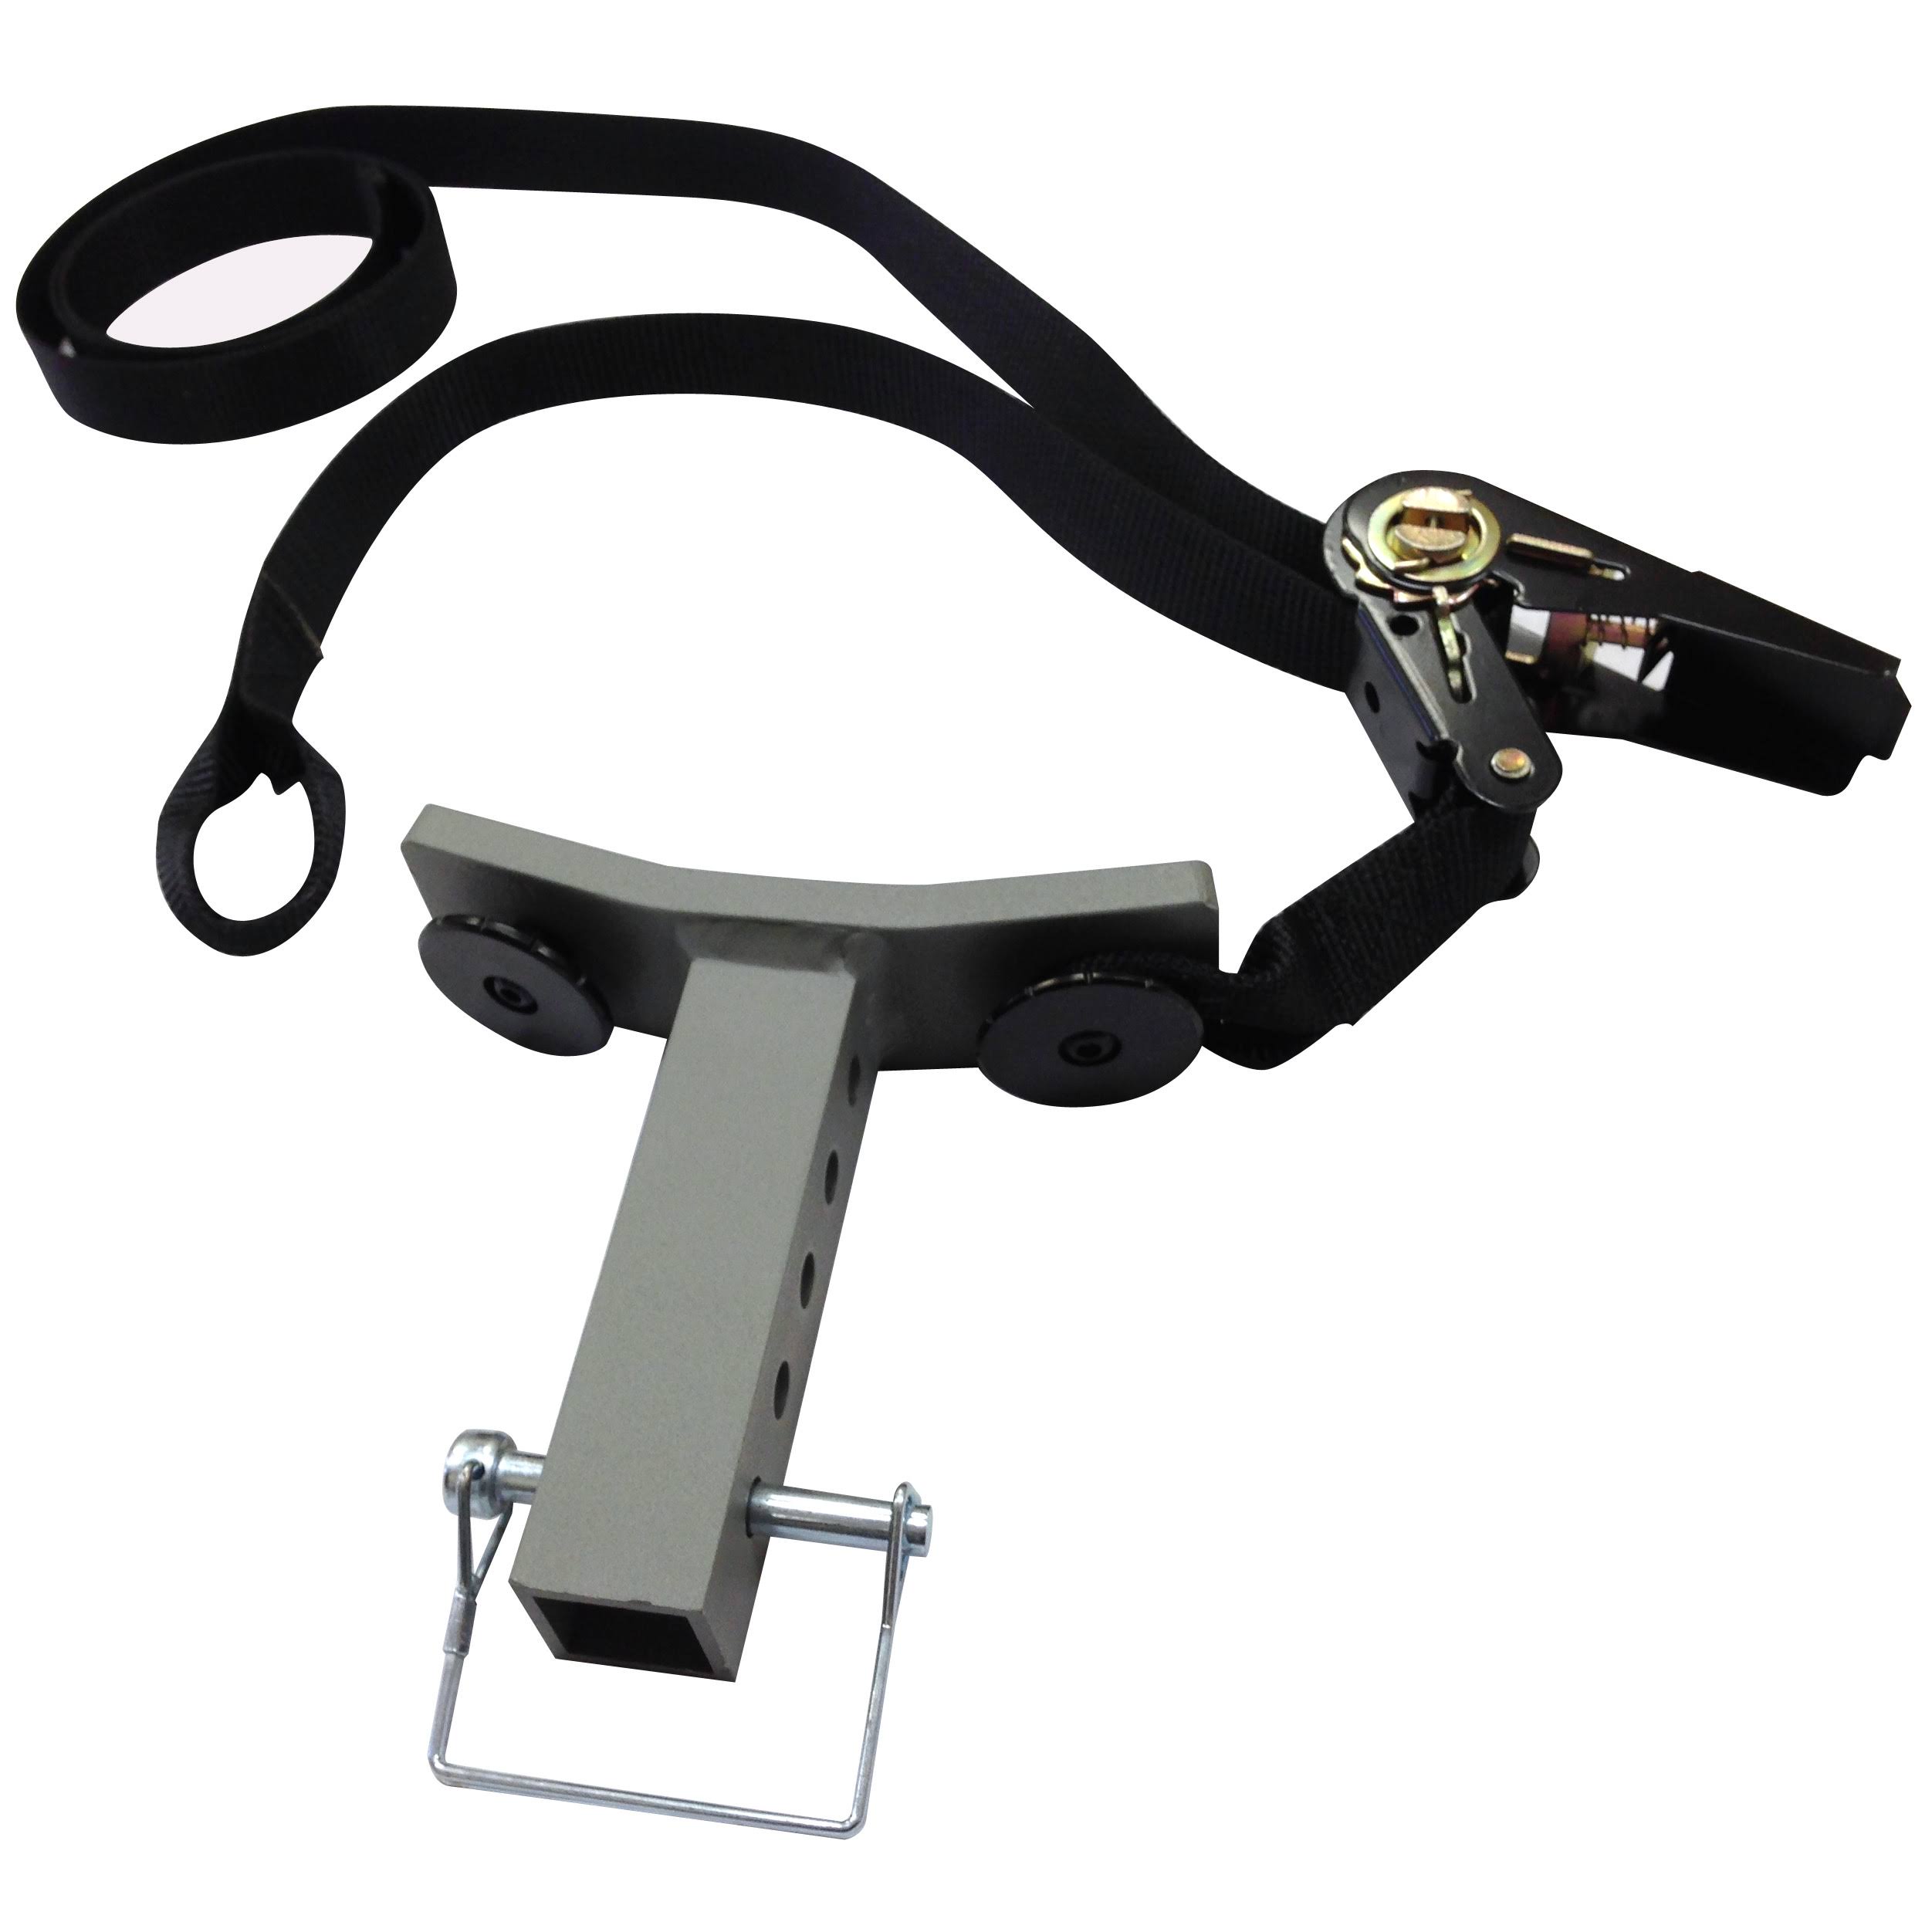 Quik-Hitch Receiver for X-Pedition Hang-On Stand